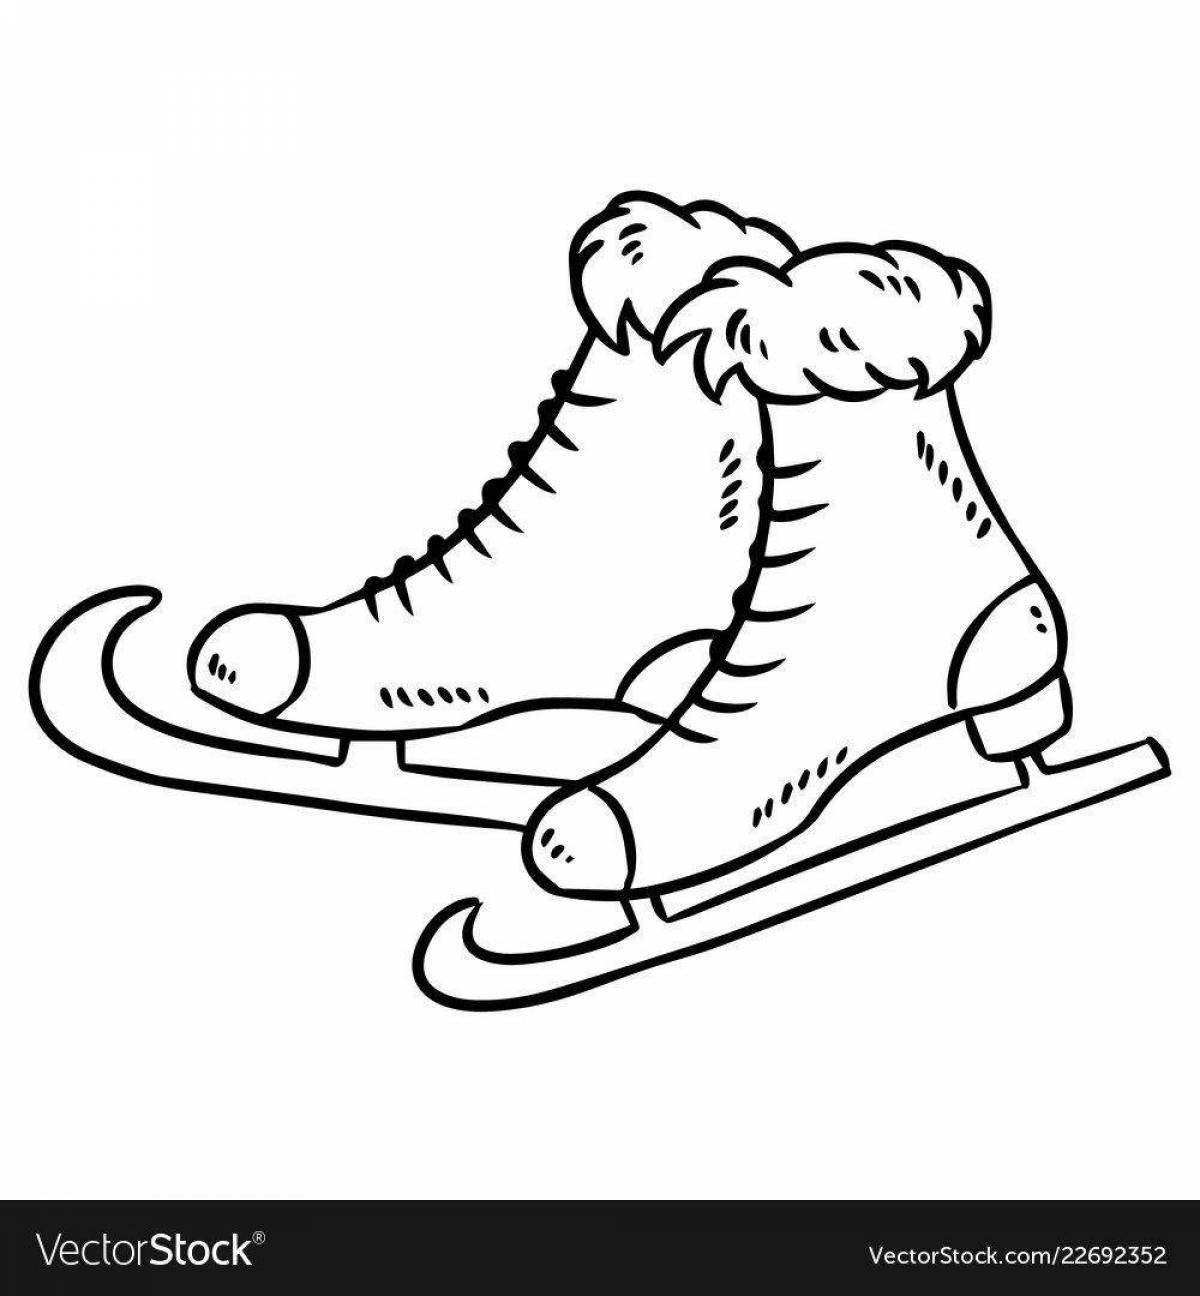 Magic skates coloring book for 5-6 year olds